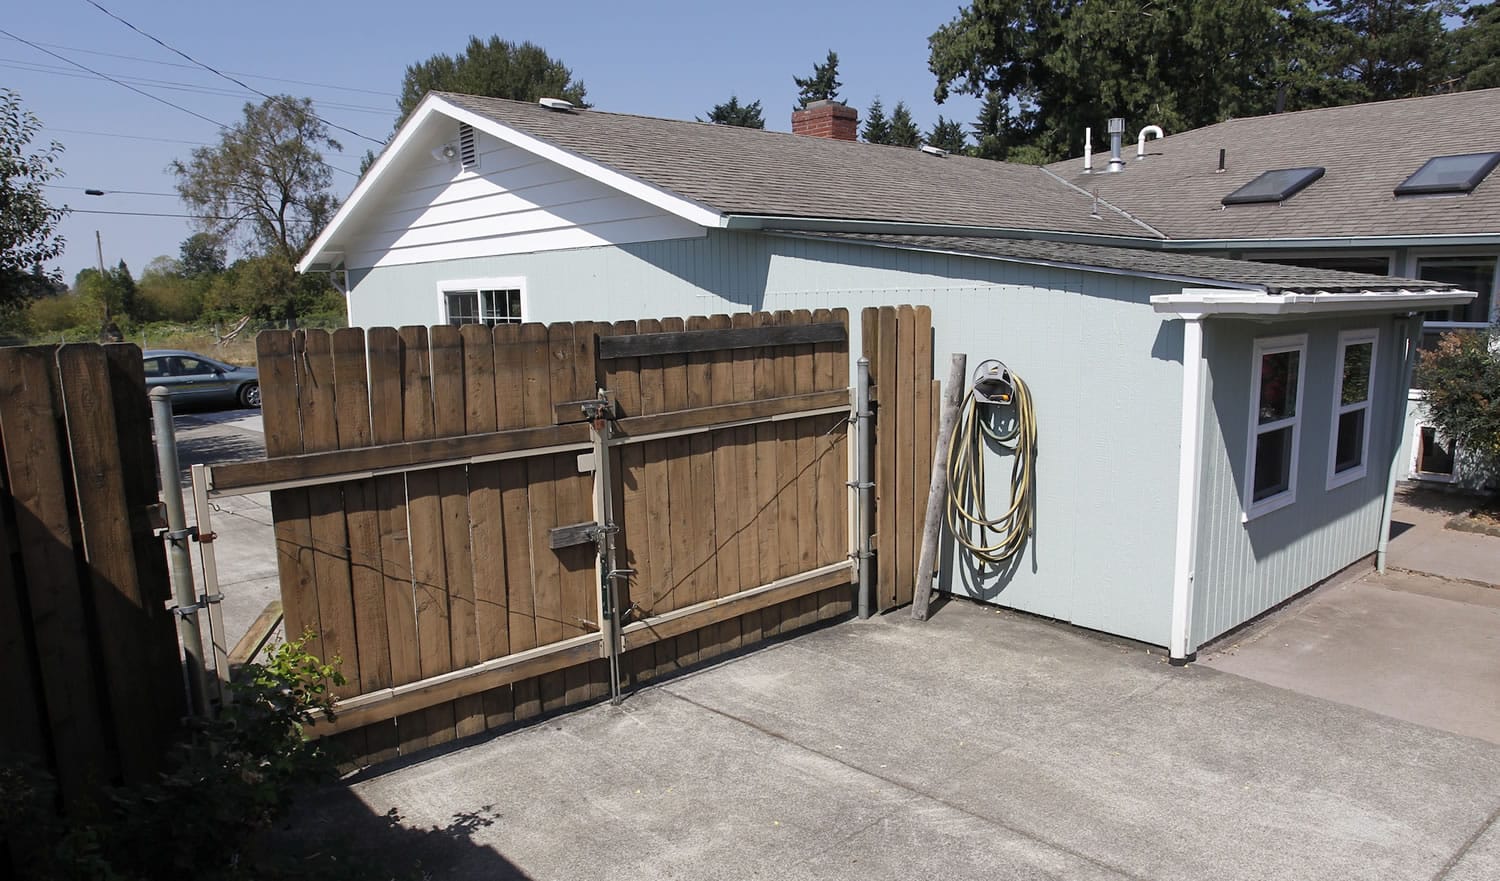 Boards are missing from a gate where an intruder entered the backyard at 3719 N.E. 54th Ave.